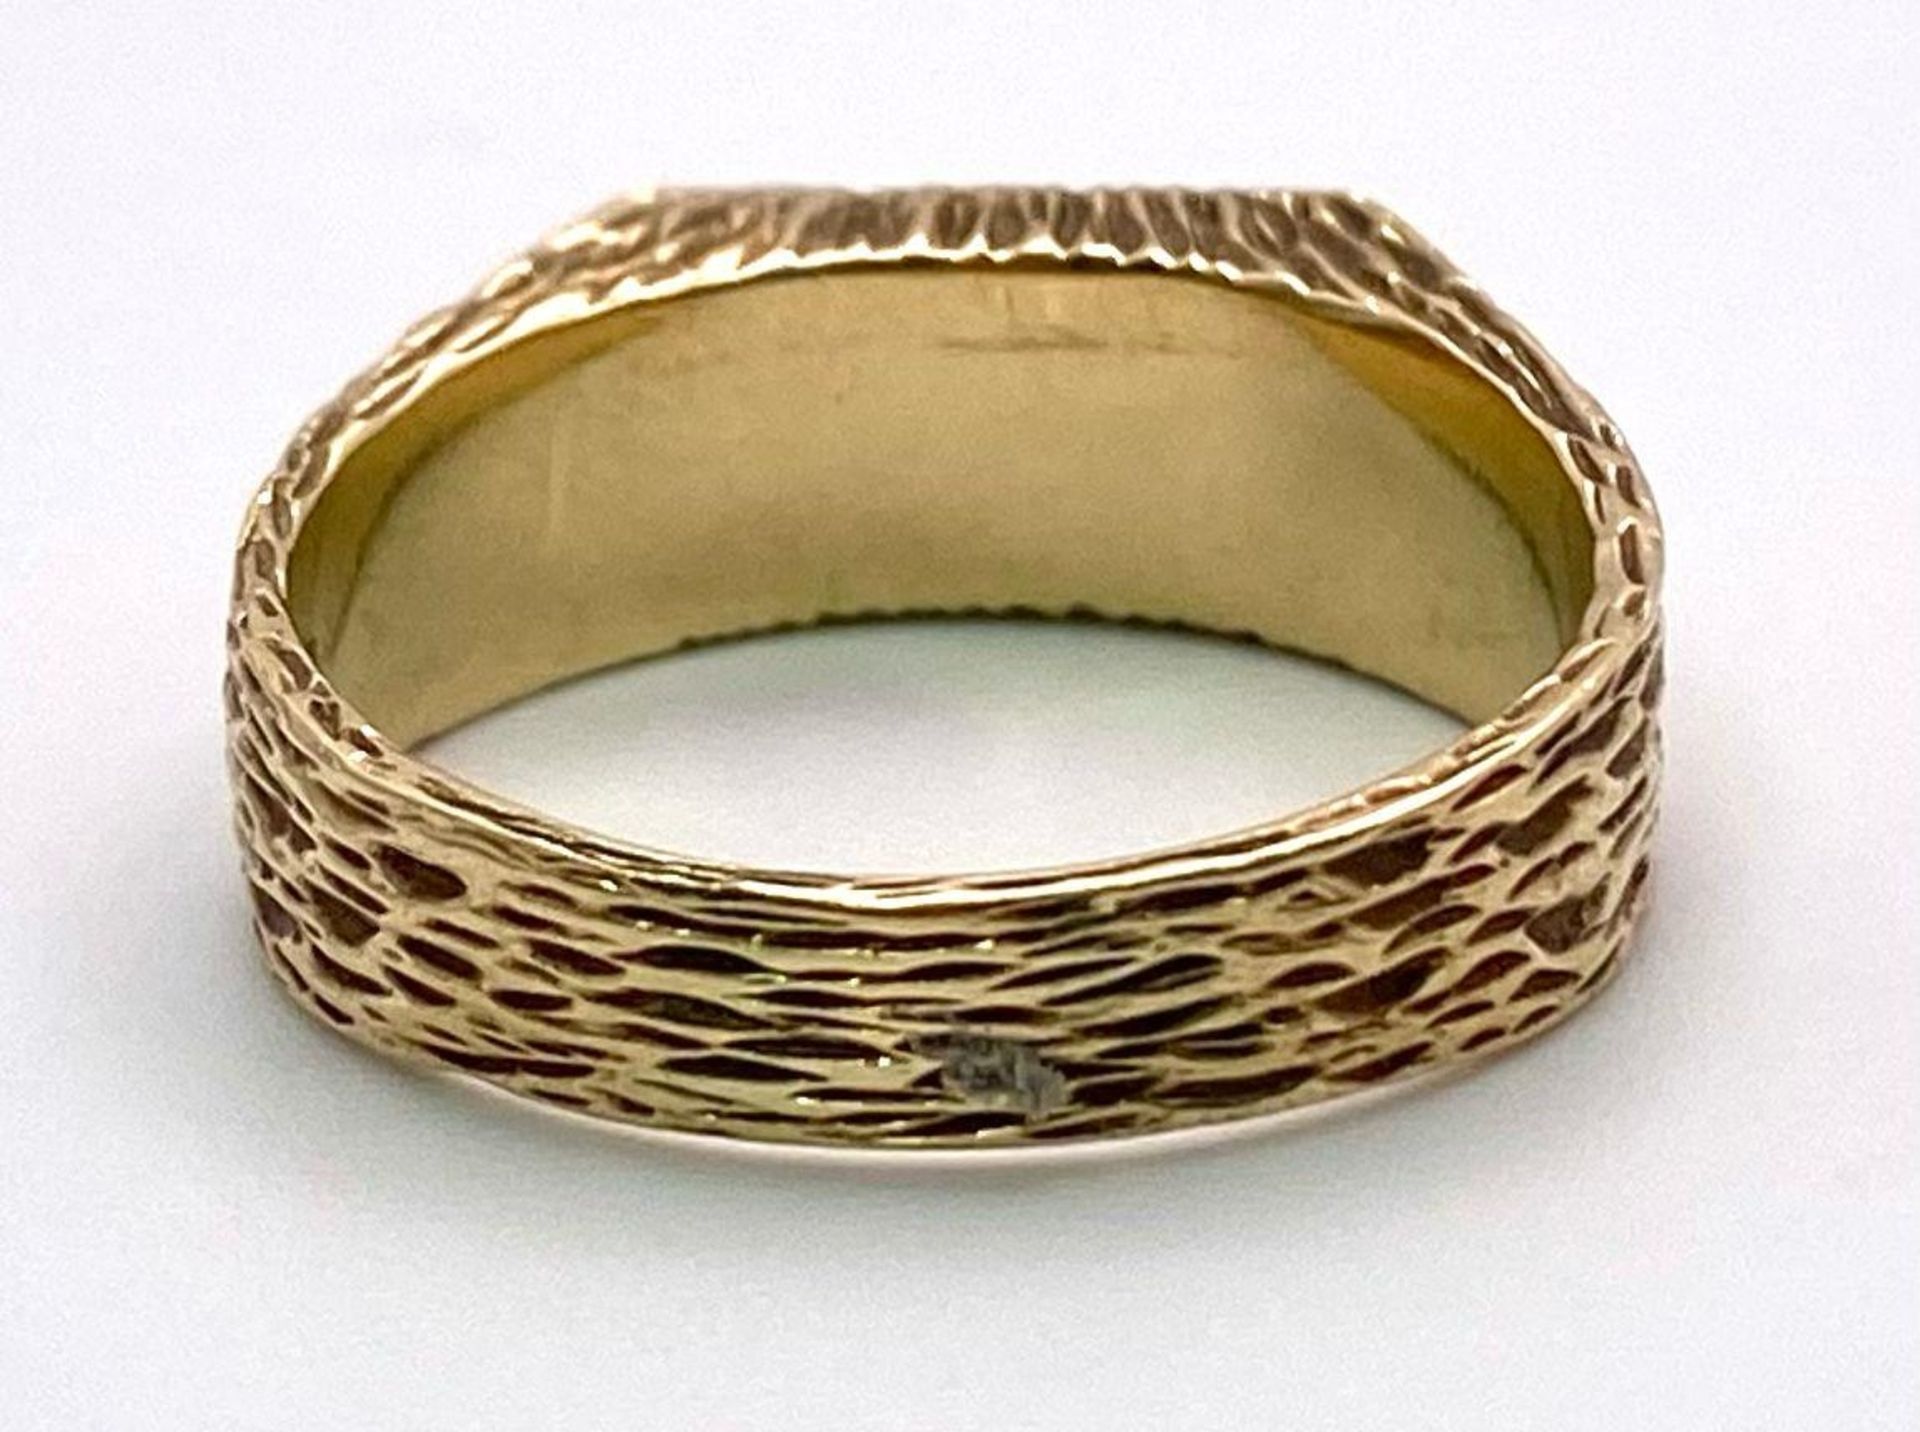 A Vintage 9K Yellow Gold and Diamond Signet Ring with Bark-Effect Decoration Throughout. Size Q/R. - Bild 3 aus 4